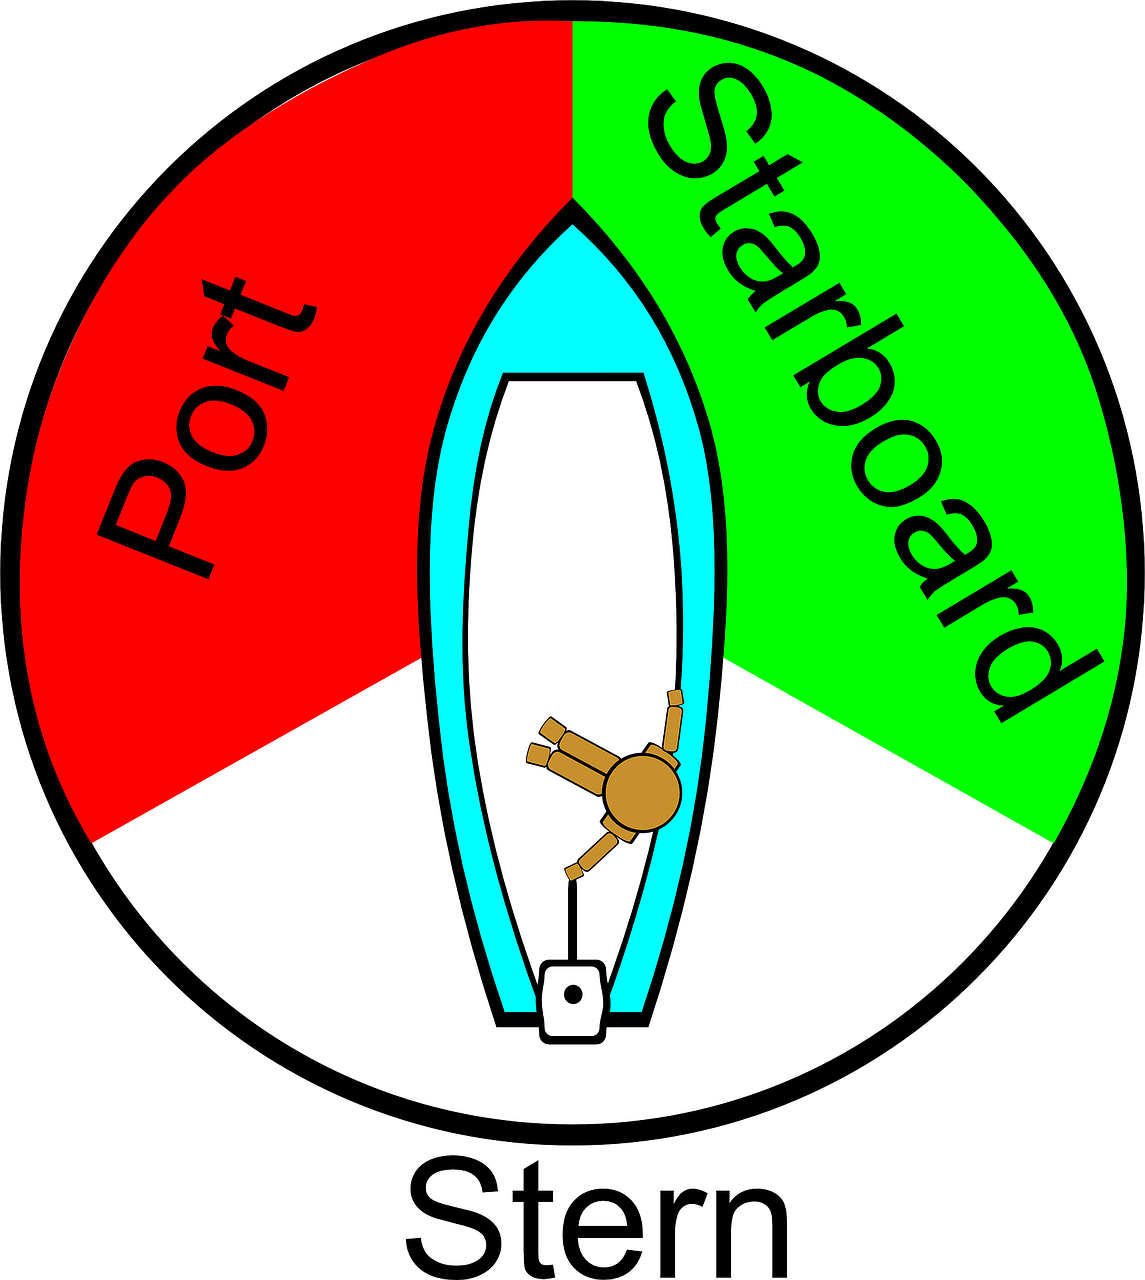 Why Do Ships Use Port & Starboard?